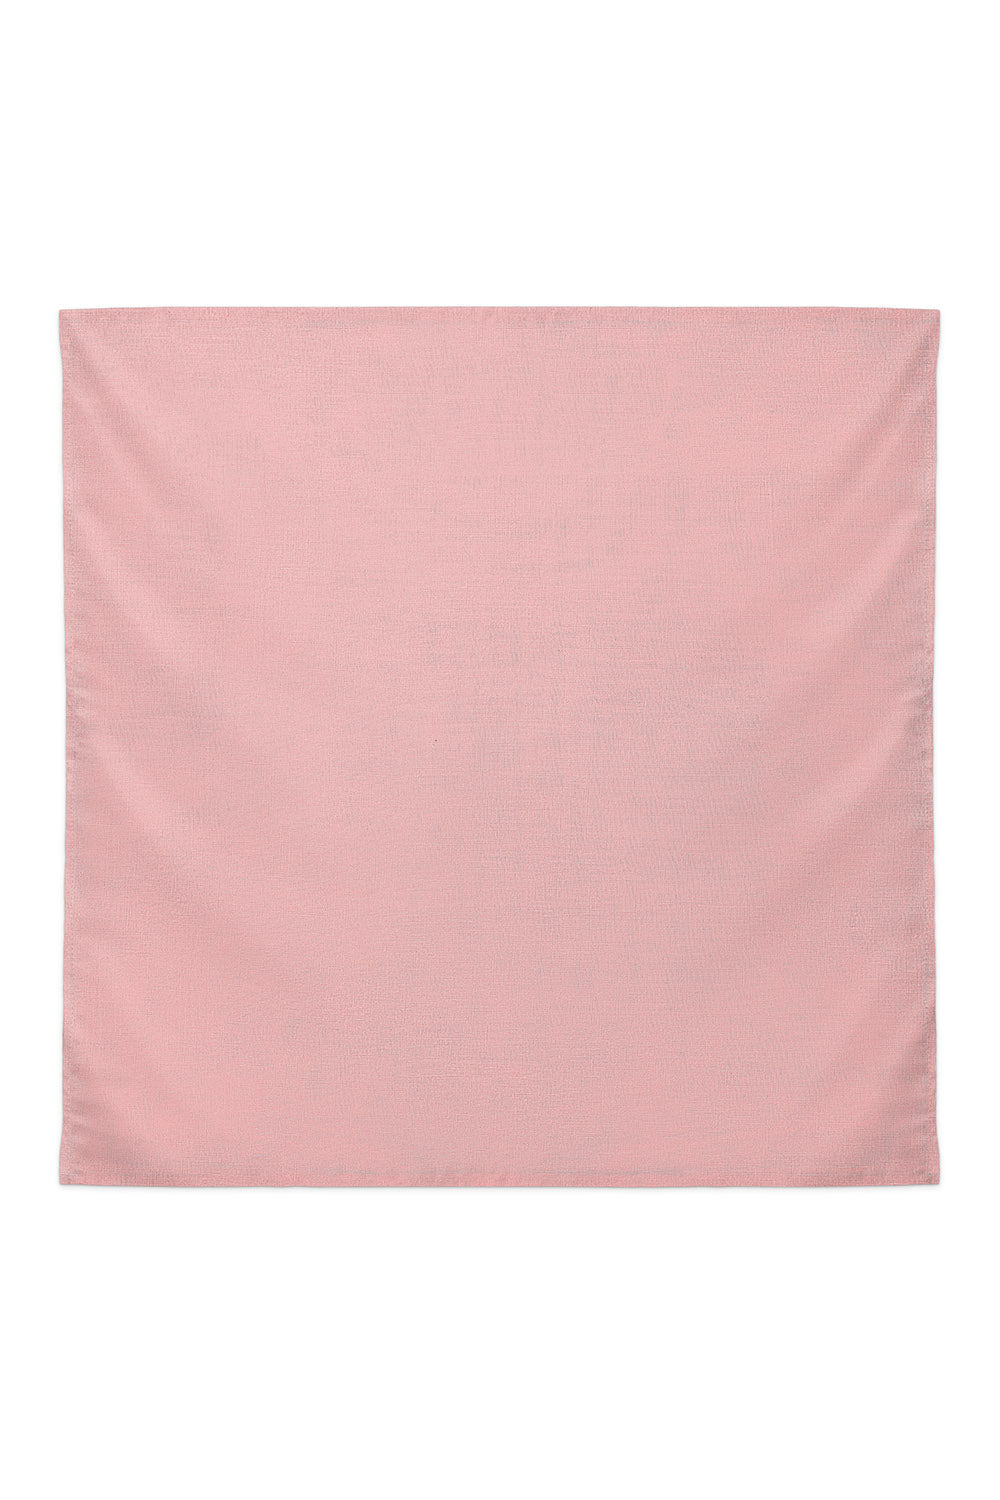 RR Basic Cotton Scarf in Salmon